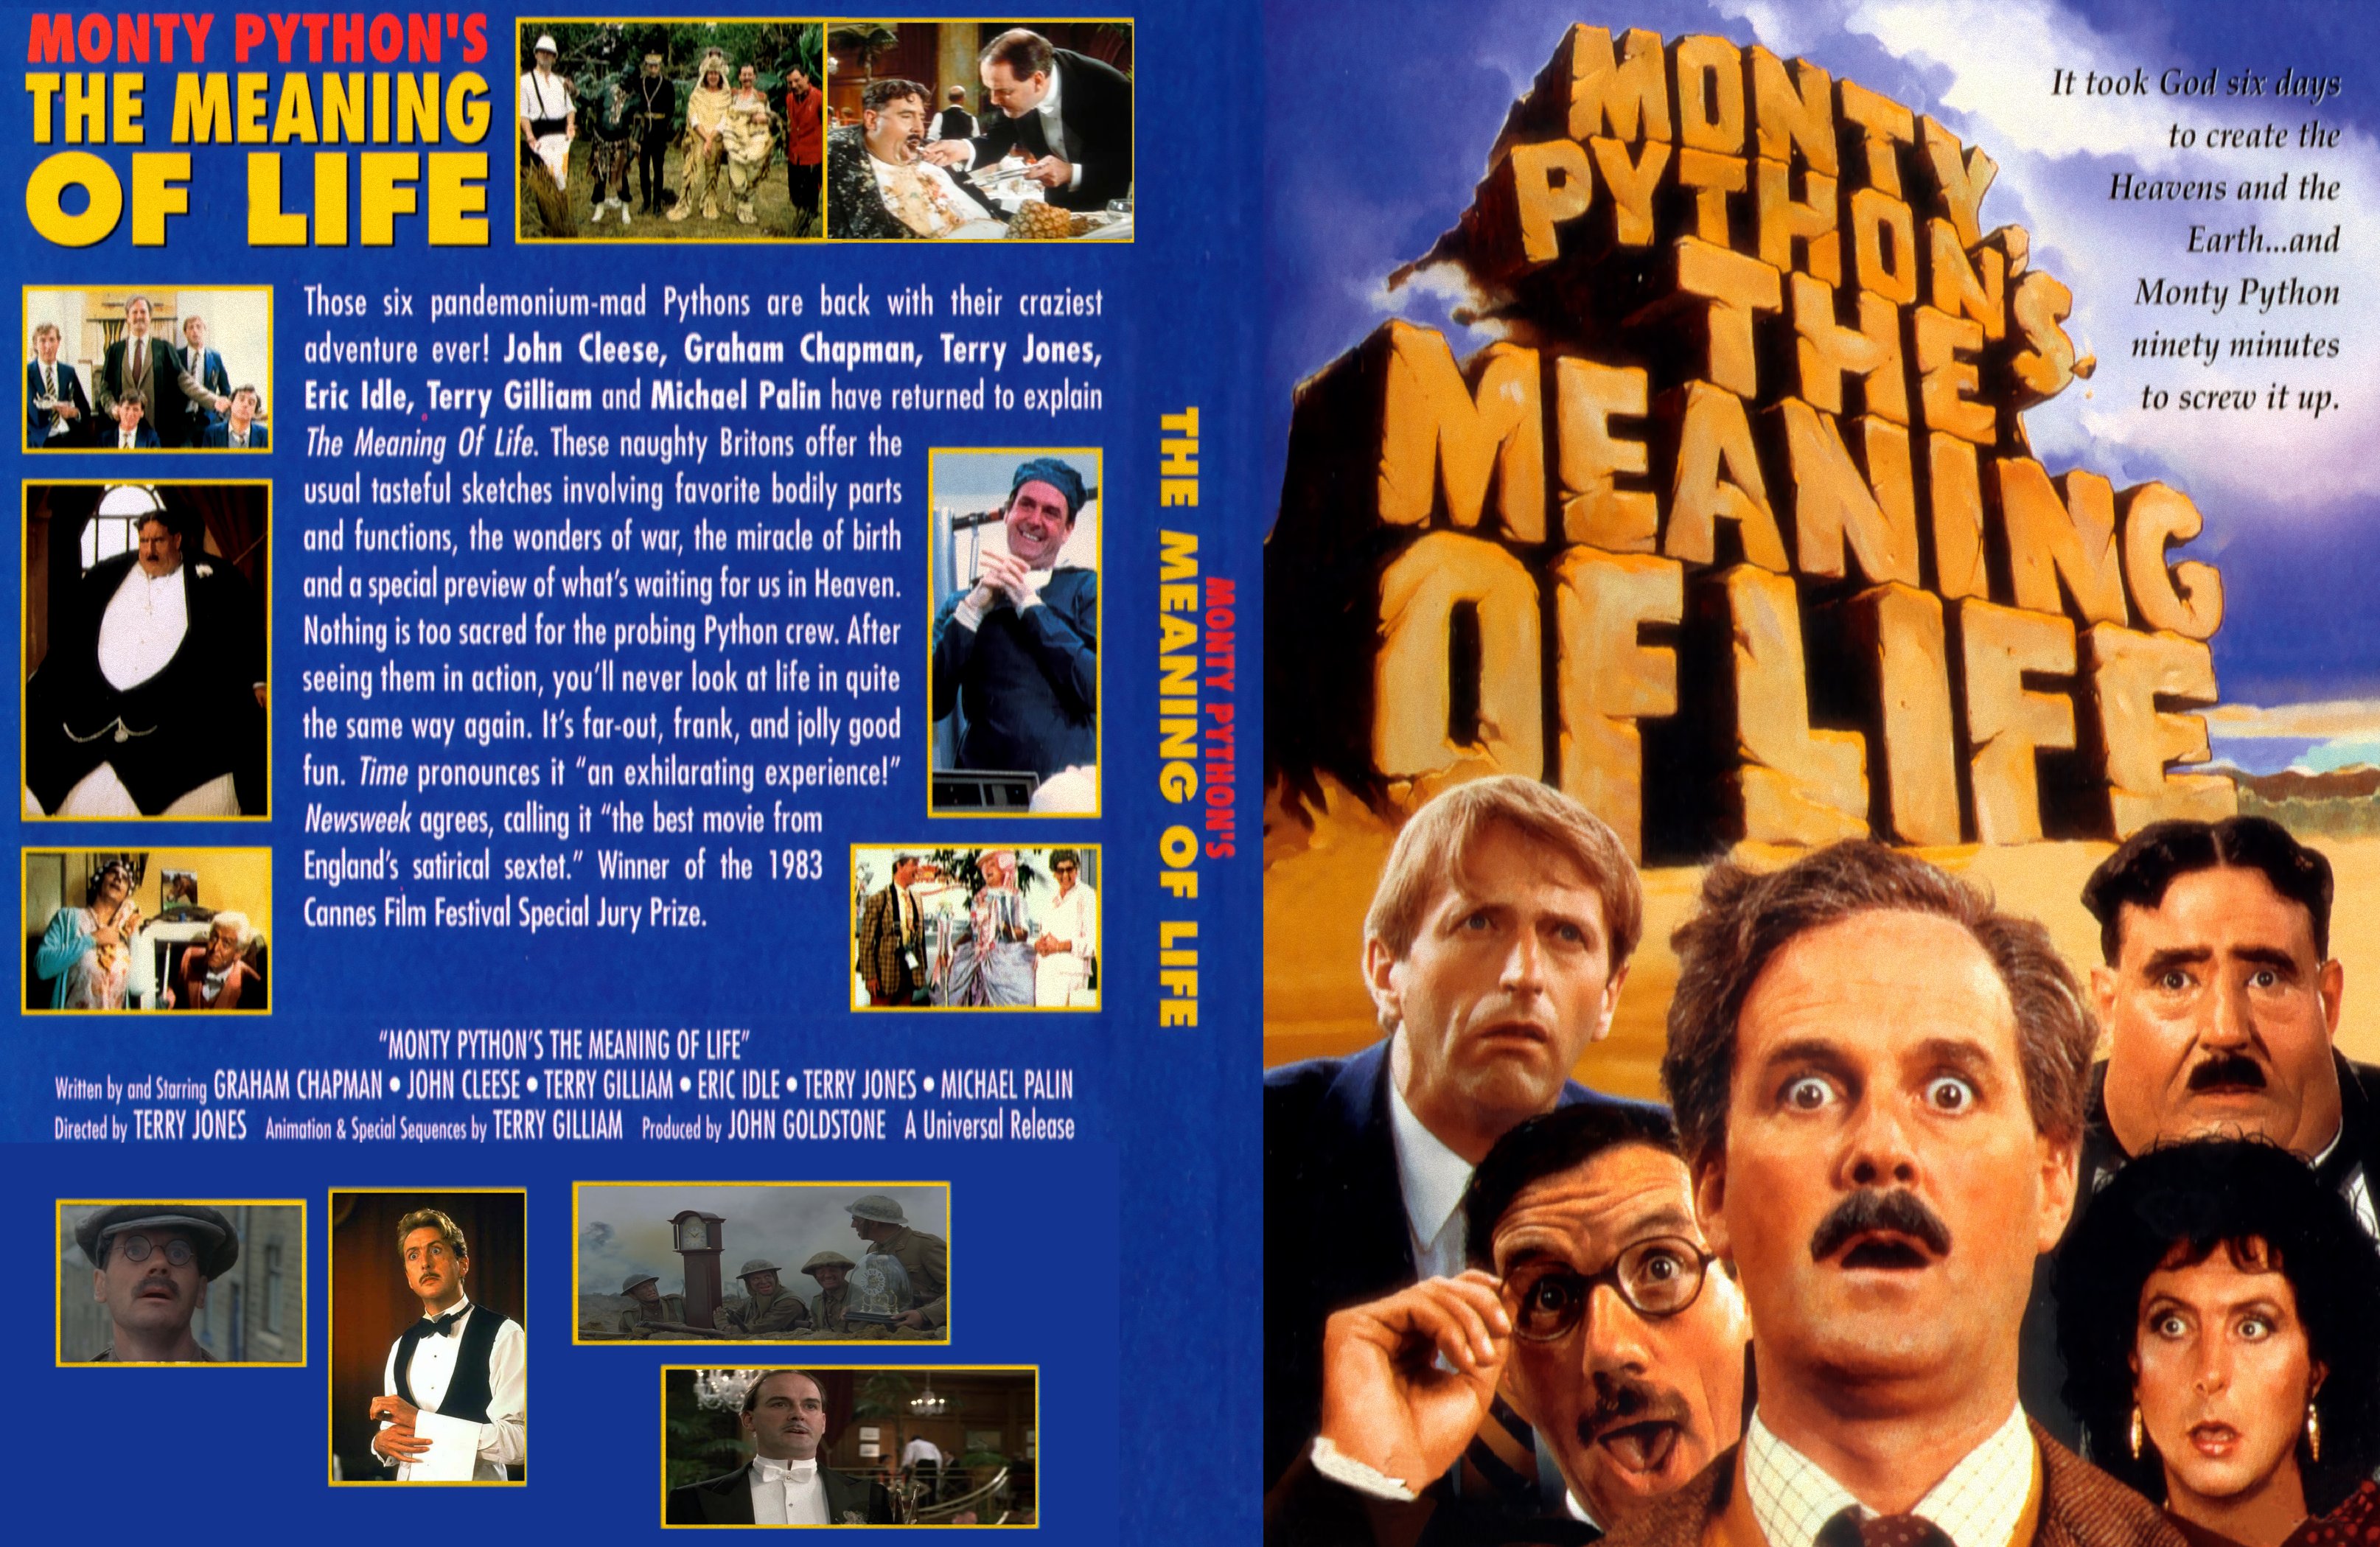 Monty Python The Meaning of Life 1983 - front back.